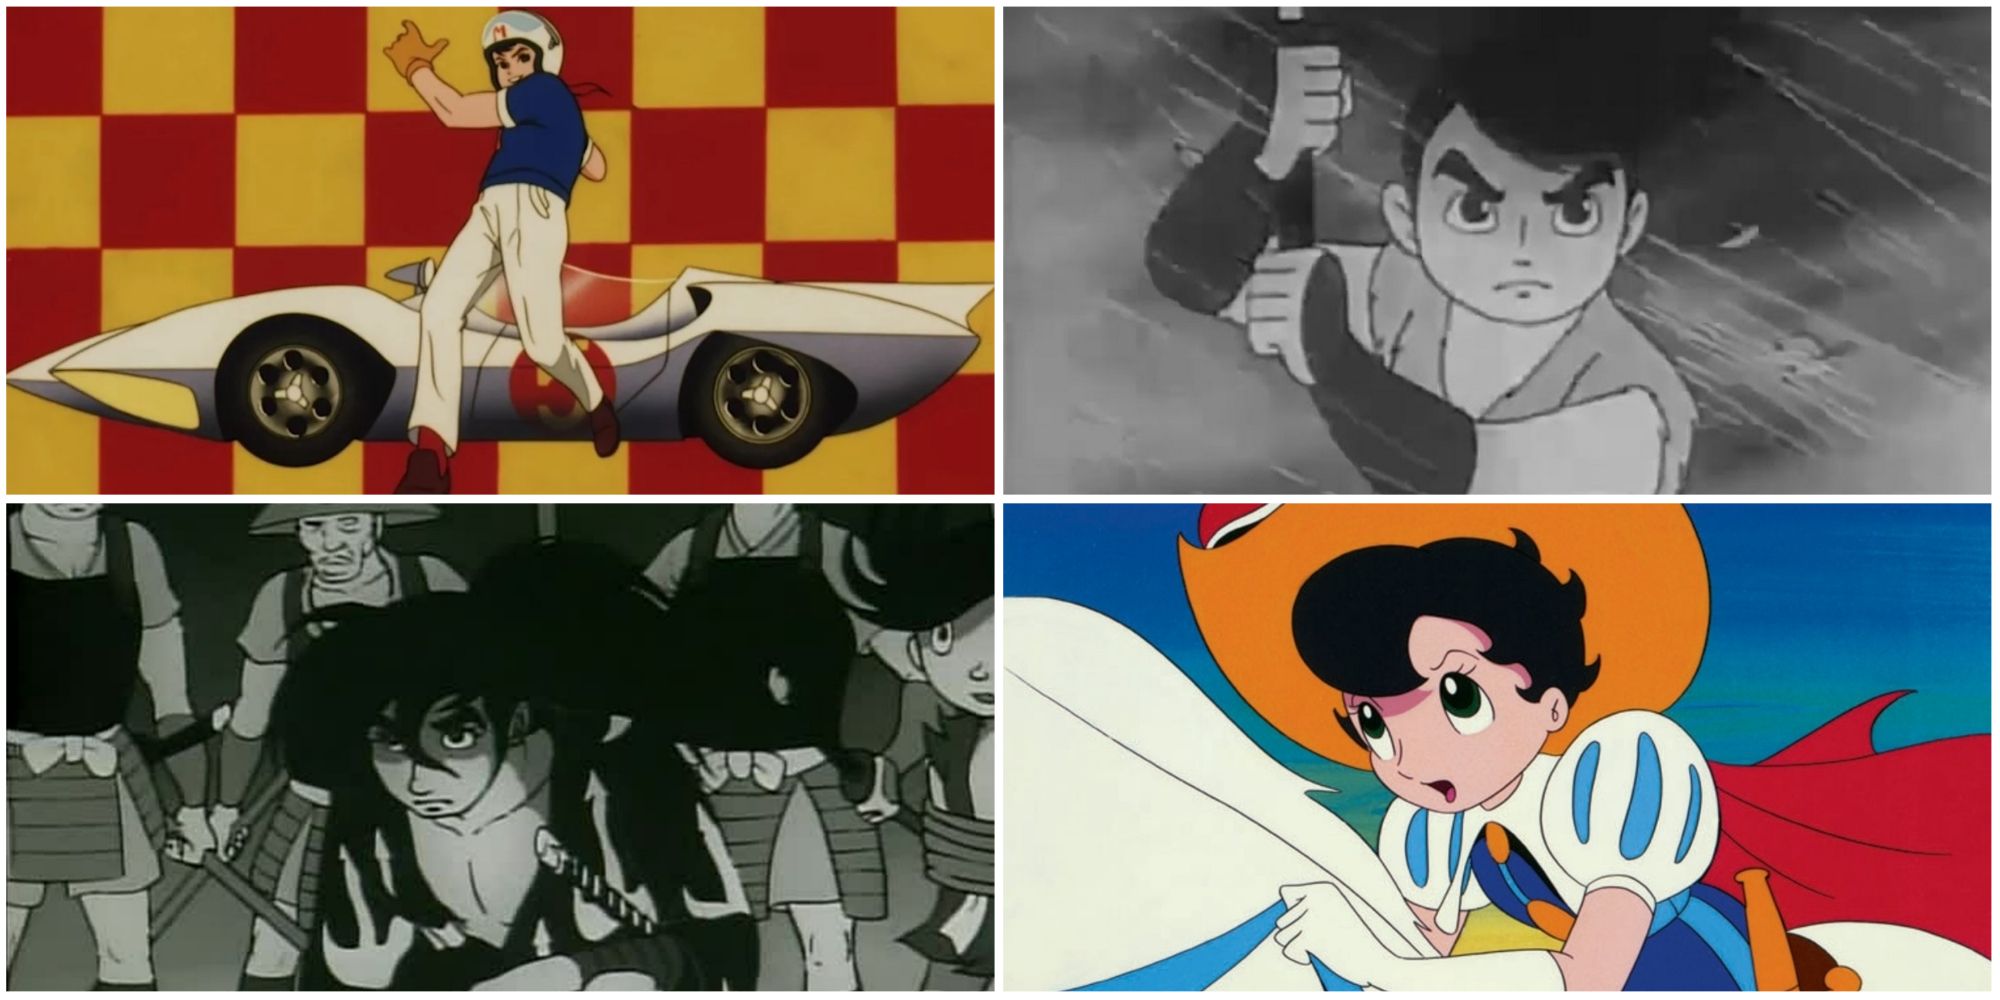 A rudimentary 1960's anime that shows a Christmas elf driving a hotrod off  a cliff. : r/dalle2